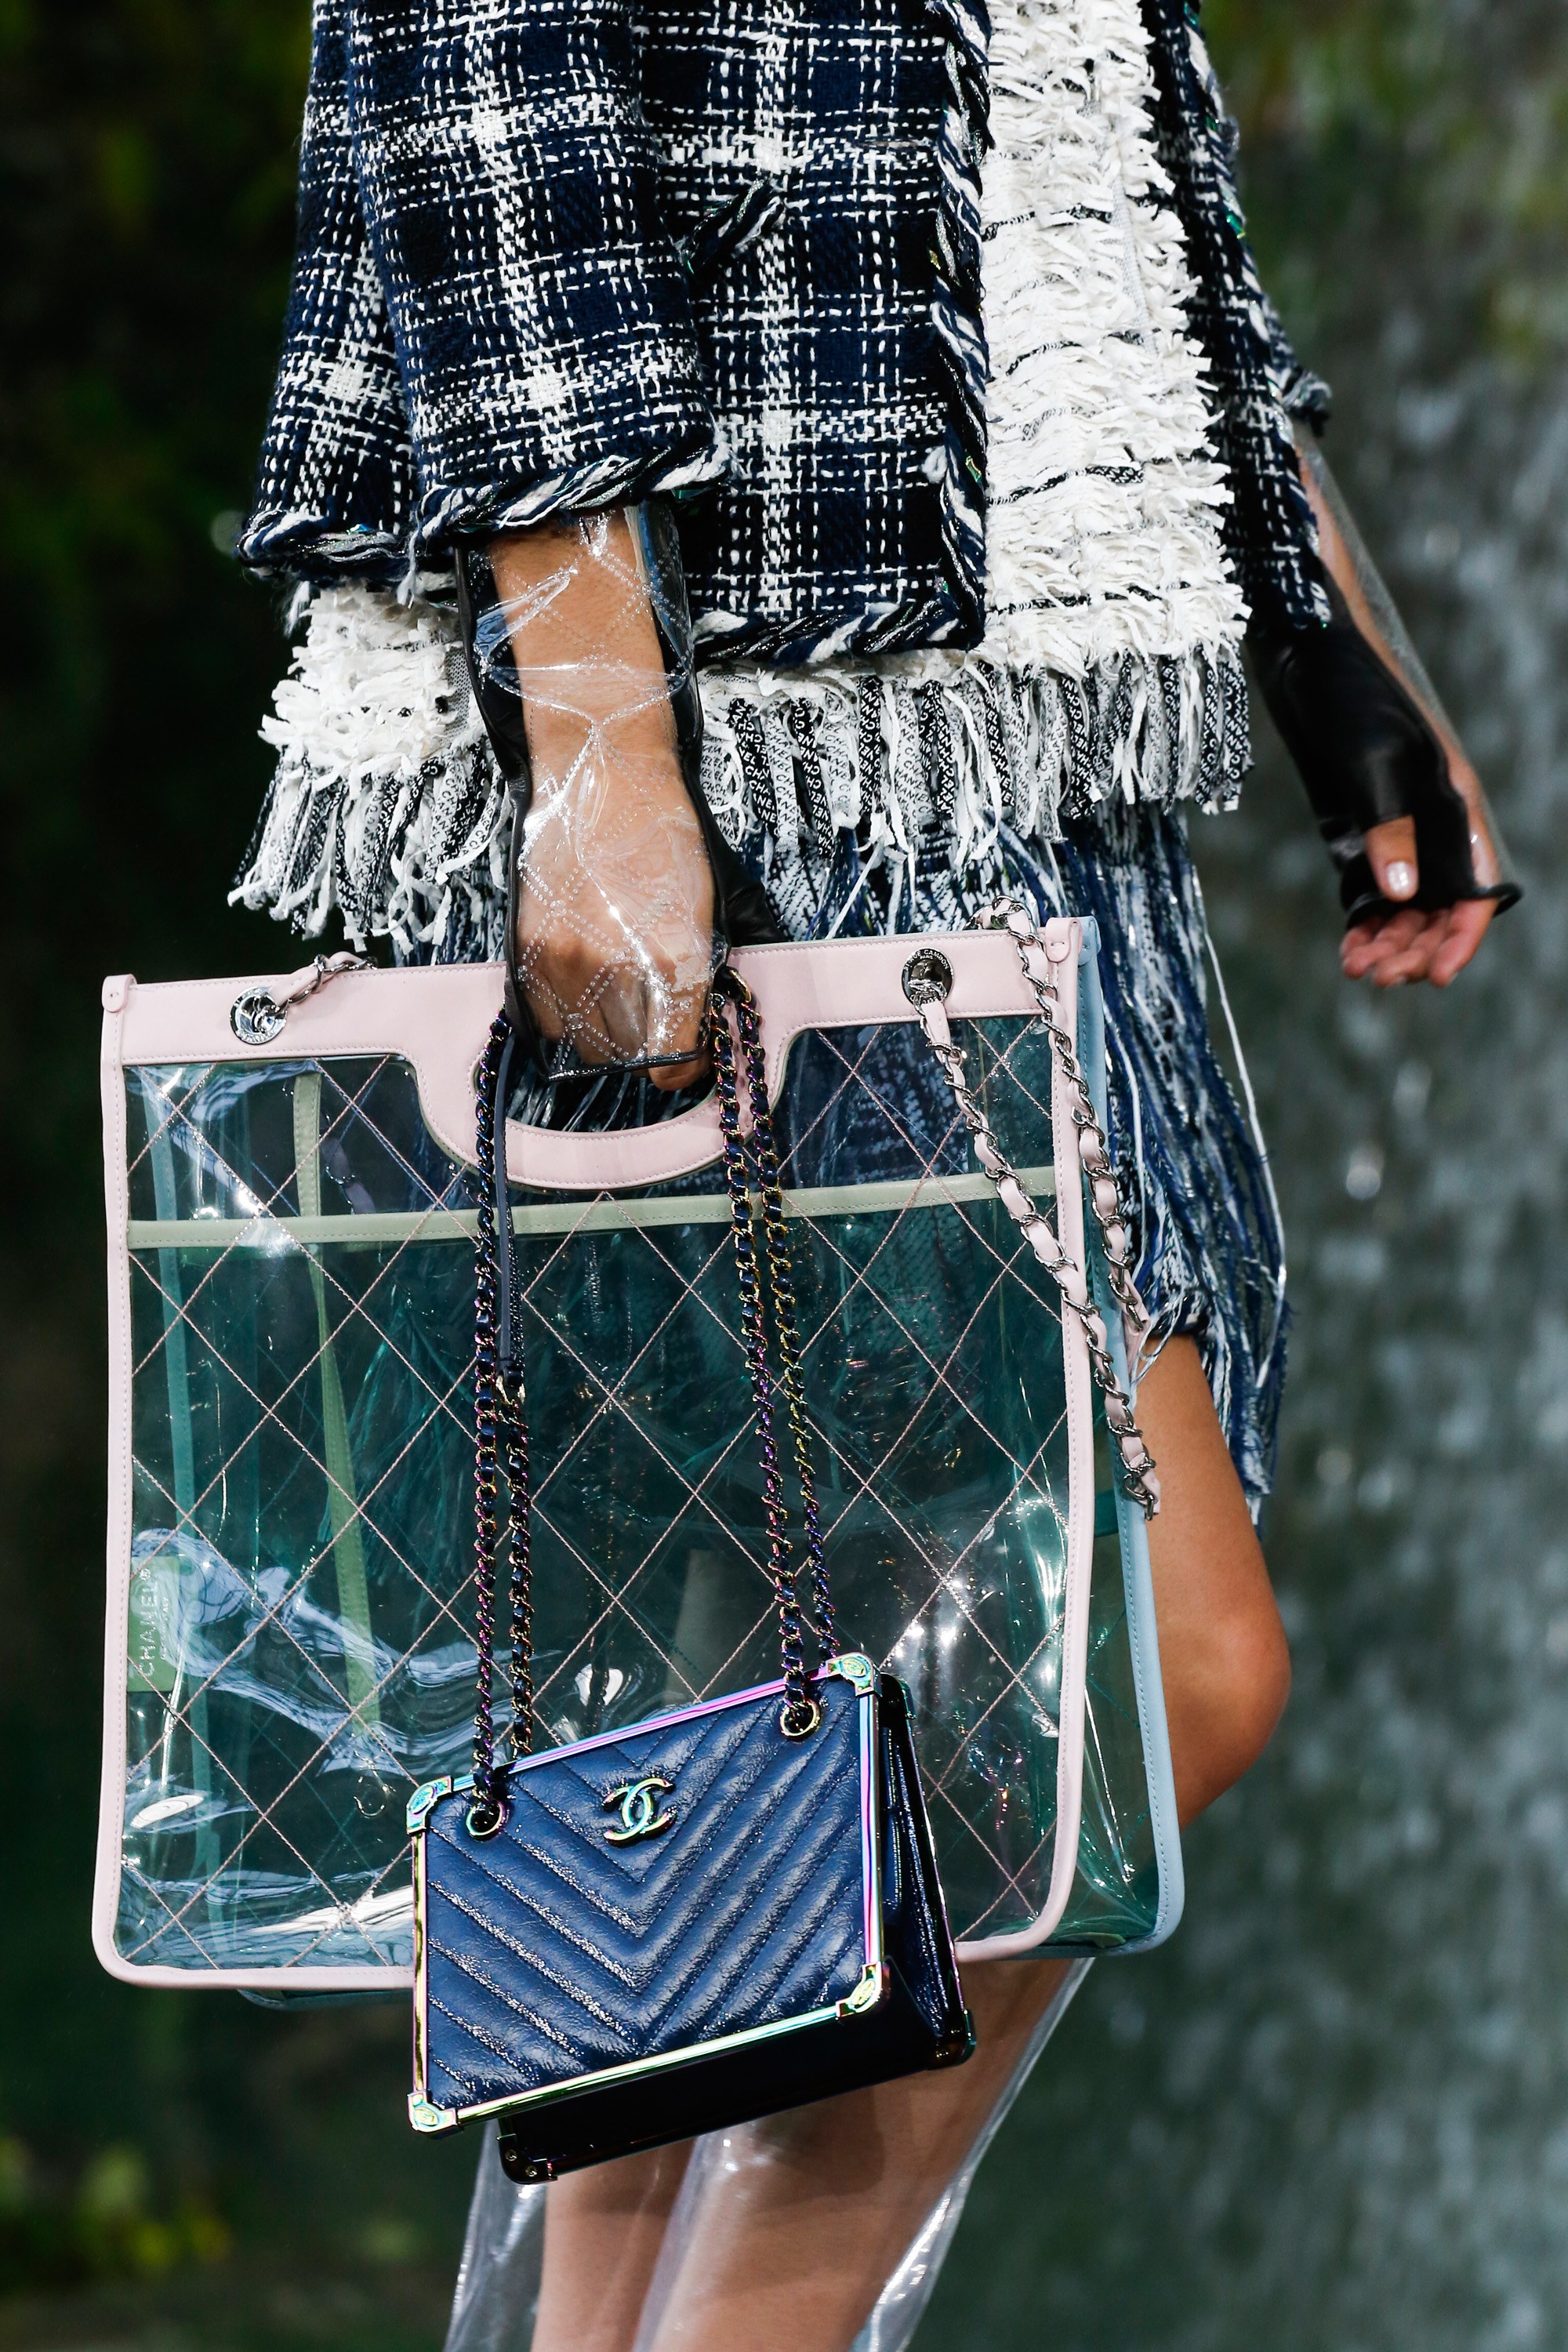 Chanel Spring/Summer 2018 Runway Bag Collection | Spotted Fashion